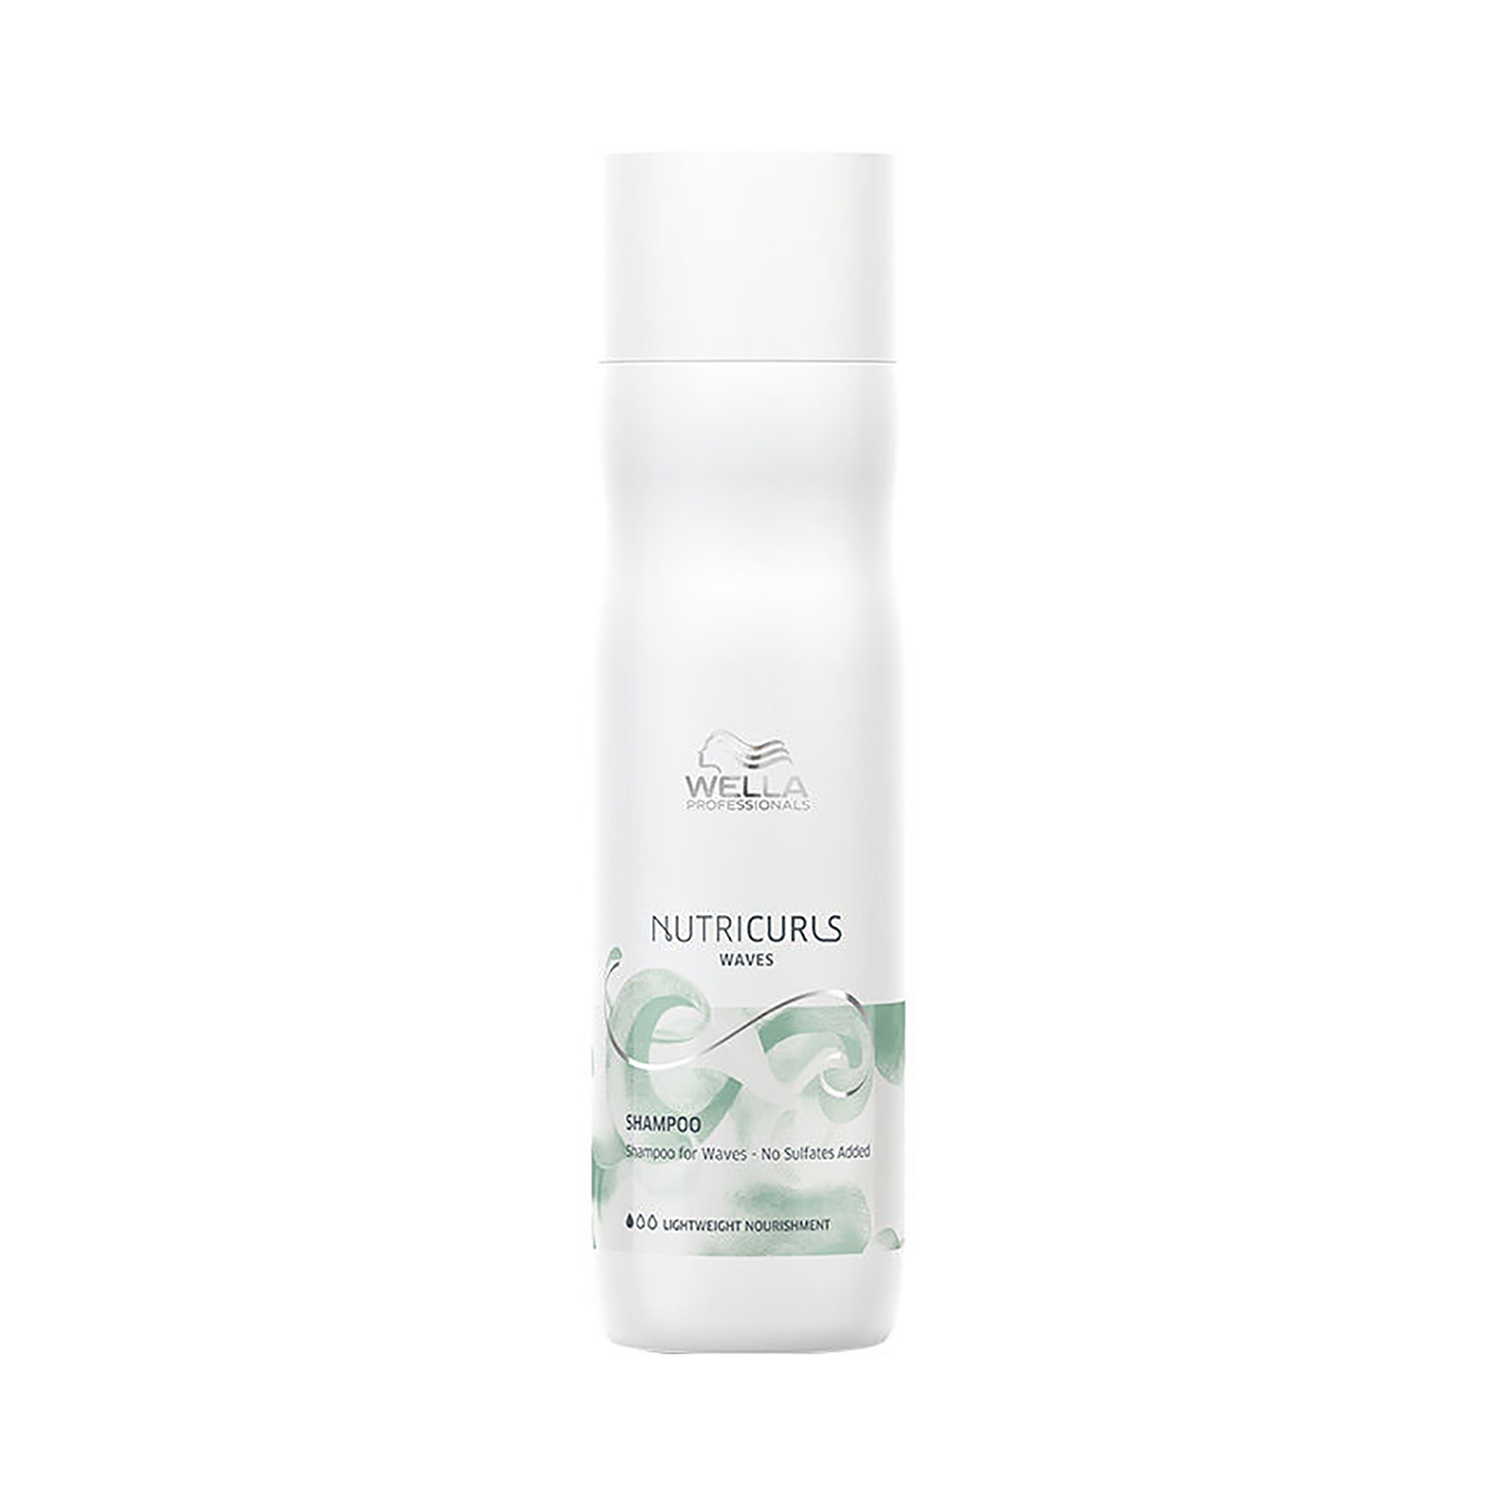 Wella Professionals | Wella Professionals Nutricurls Sulphate Free Shampoo for Waves (250ml)